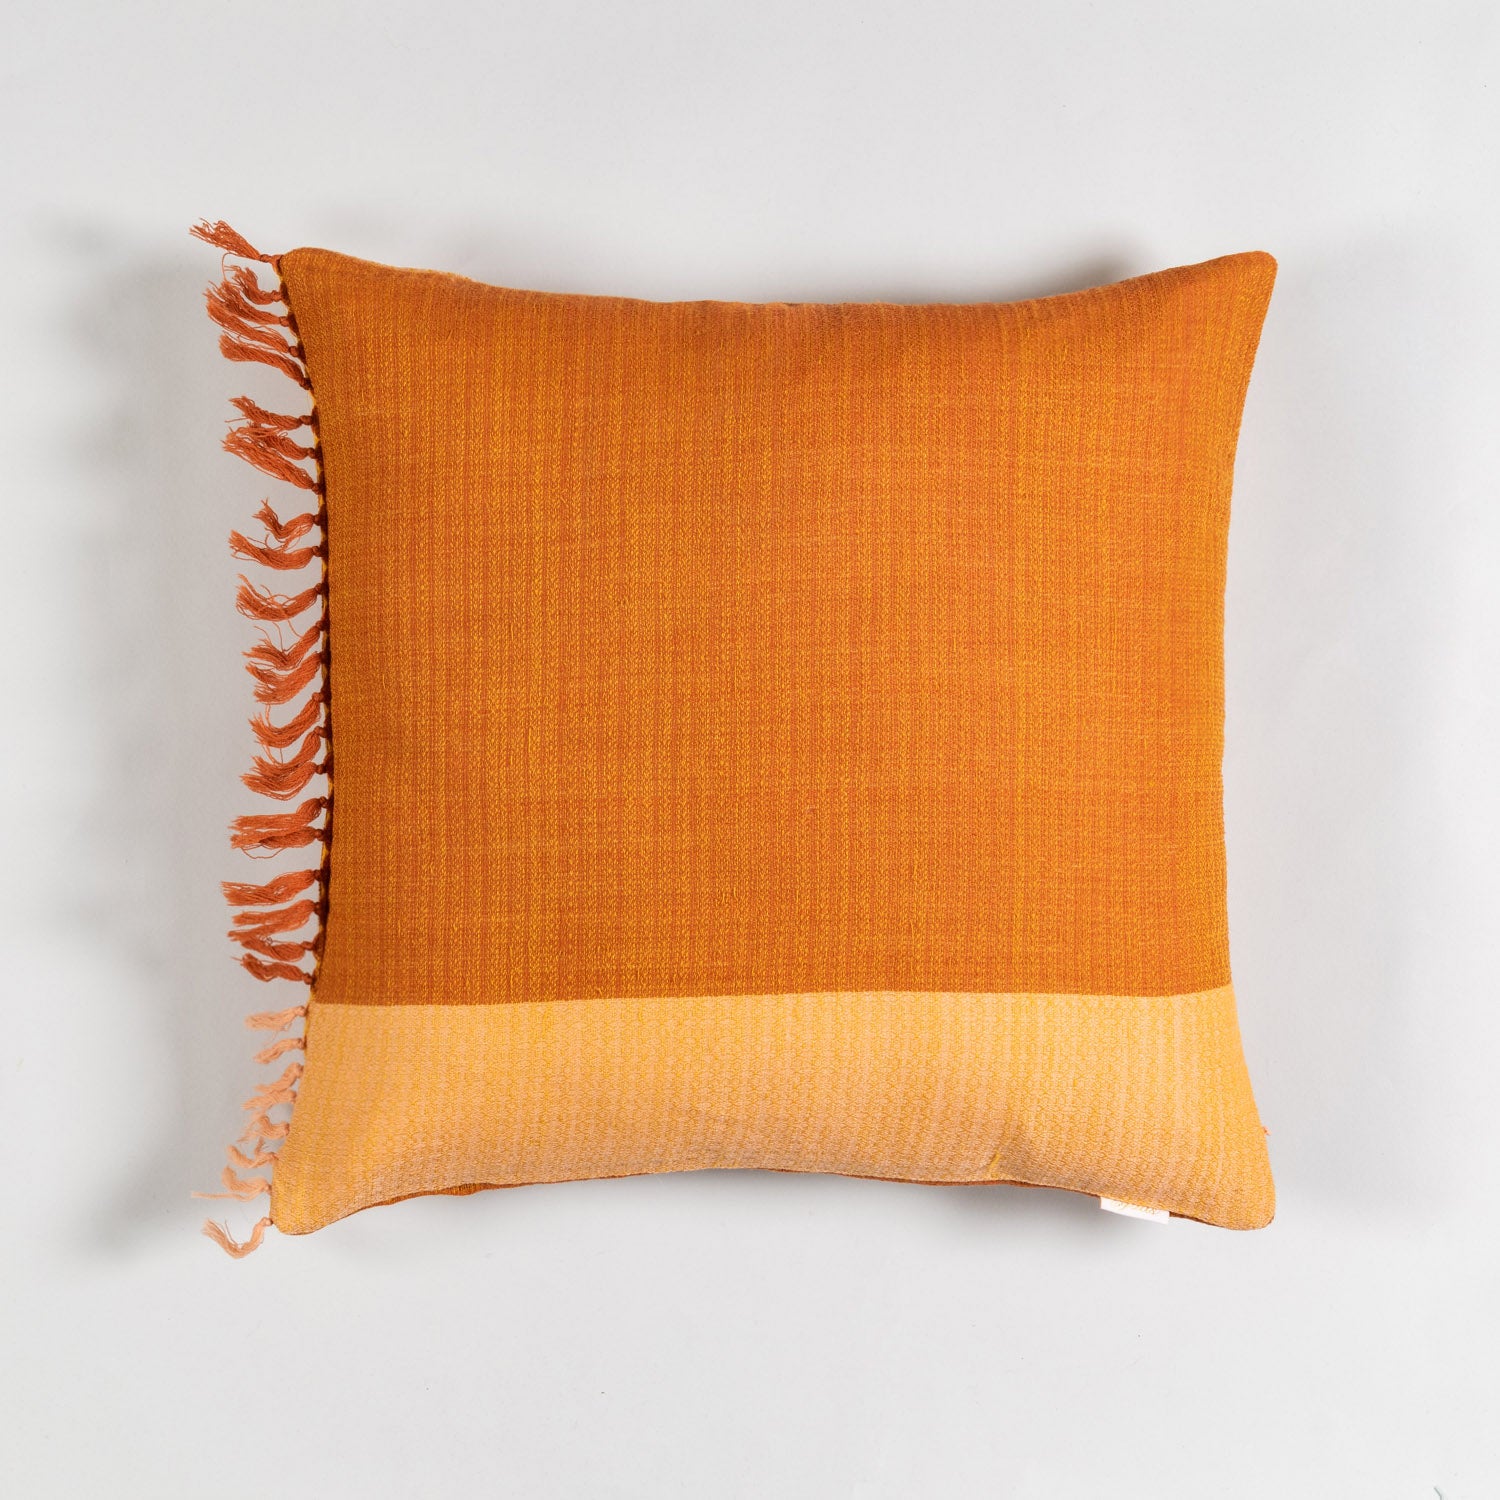 Handwoven Upcycled Mustard & Yellow Wool Cushion Cover - 18x18